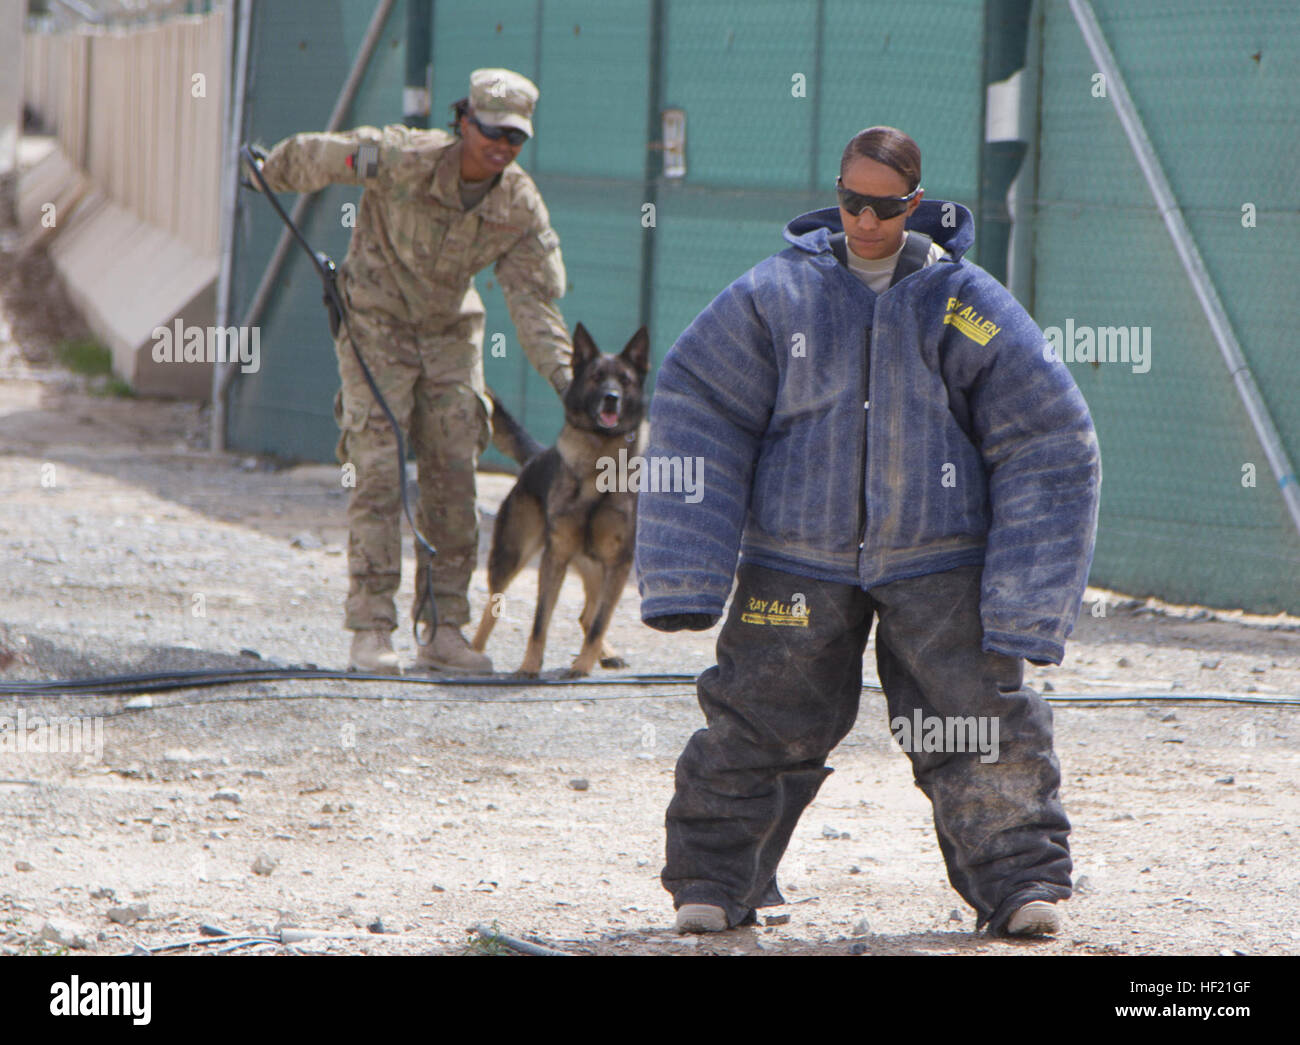 Sgt. 1st Class Sherise Stephens, Kandahar Field Detention Site noncommissioned officer in charge, 551st Military Police Company, prepares to be chased by a military working dog during a training exercise March 19, 2014, at Kandahar Airfield, Afghanistan. Service members stationed at KAF volunteered to participate in the training exercise where the dogs demonstrated a variety of techniques to halt their objective.  (U.S. Army photo by Cpl. Mariah Best) KAF service members help train military working dogs 140319-Z-TF878-855 Stock Photo